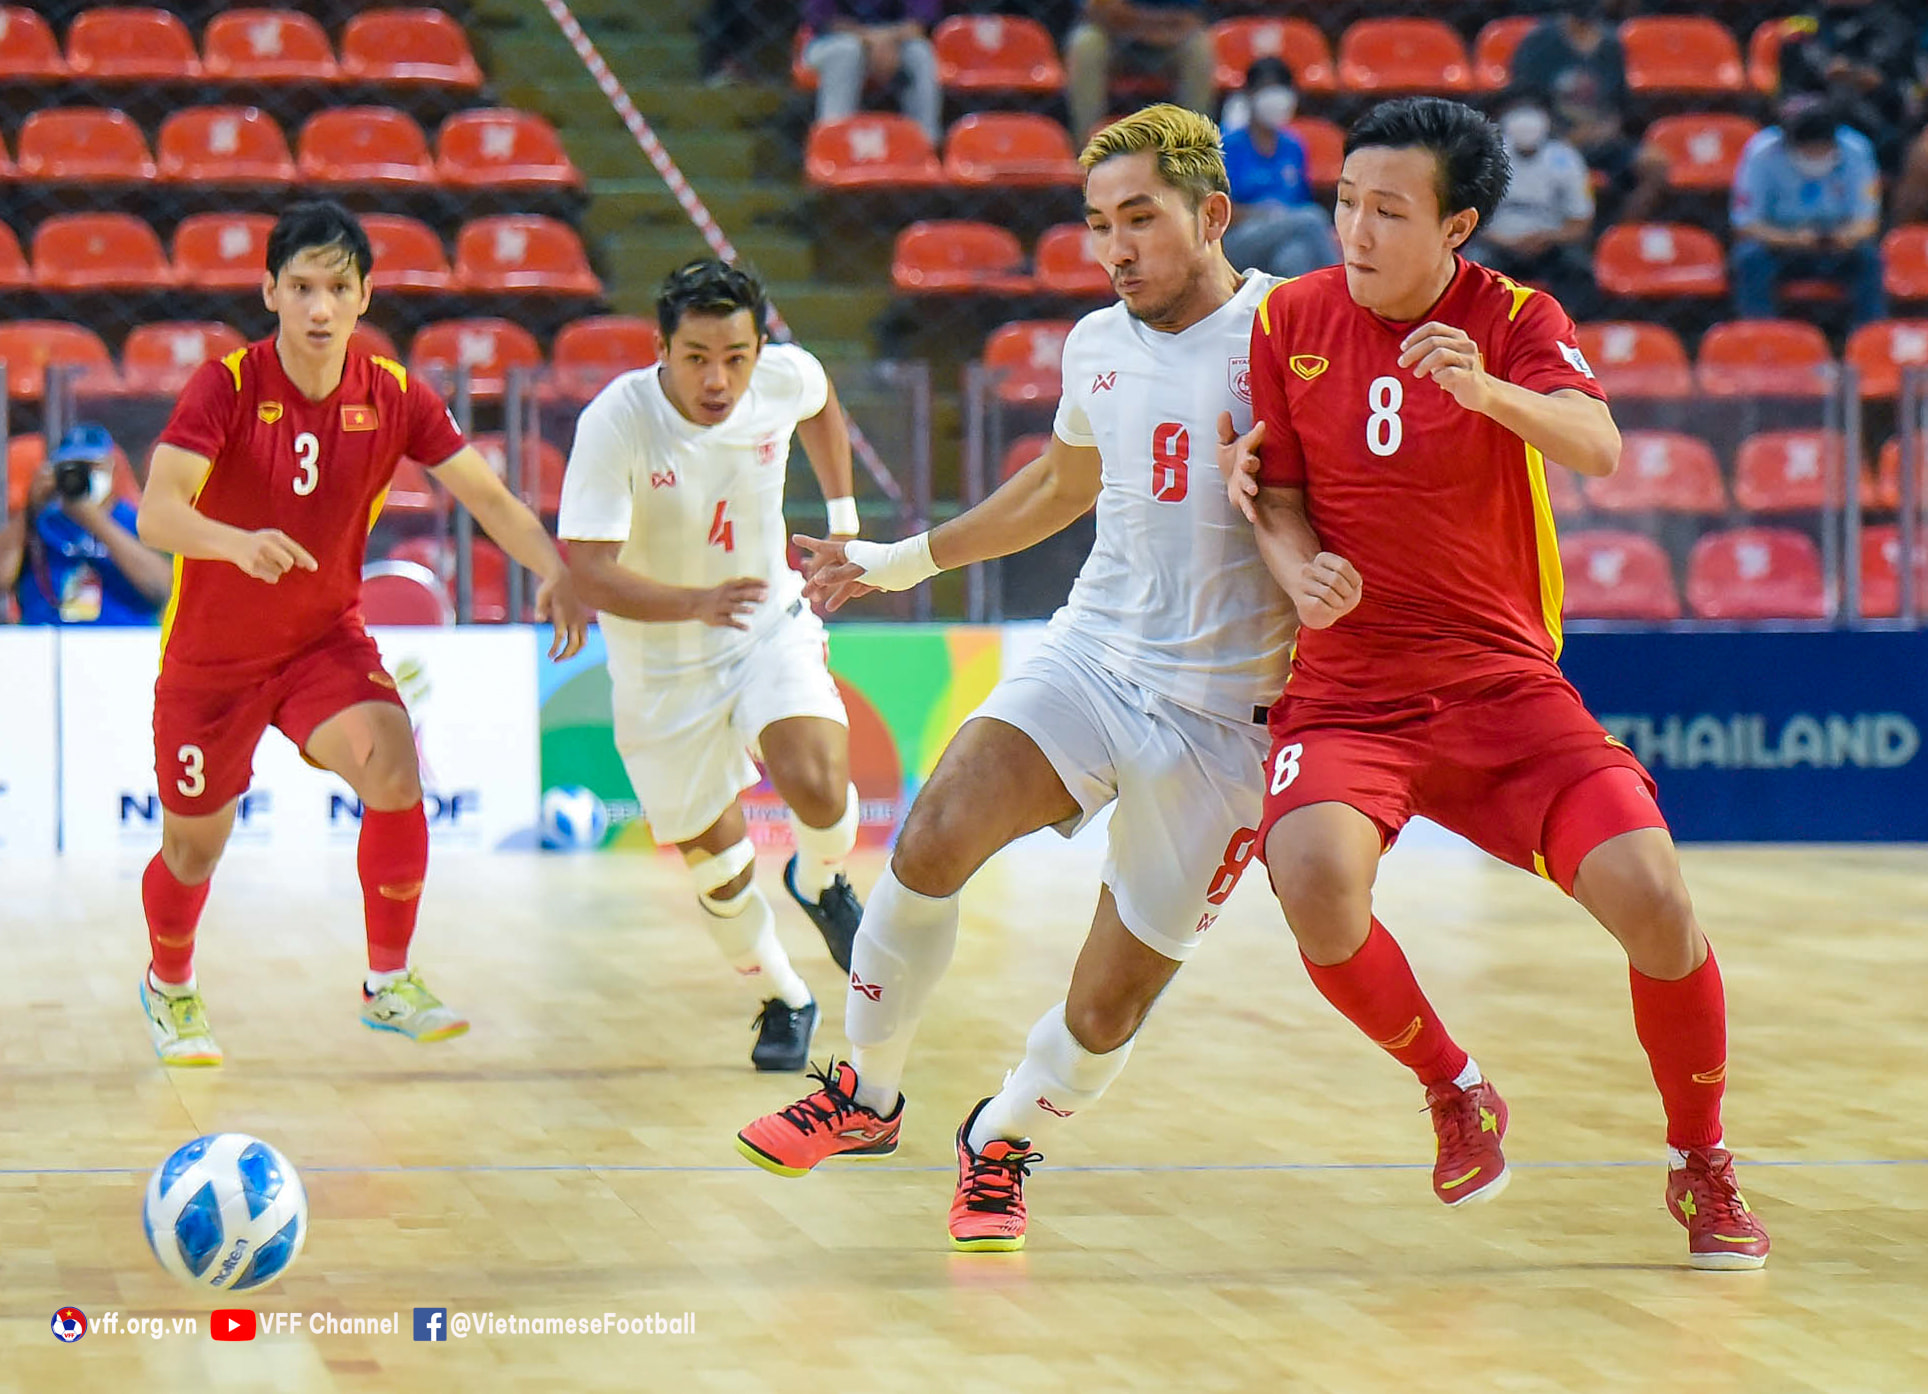 Vietnam qualify for 2022 Asian Futsal Cup with win over Myanmar